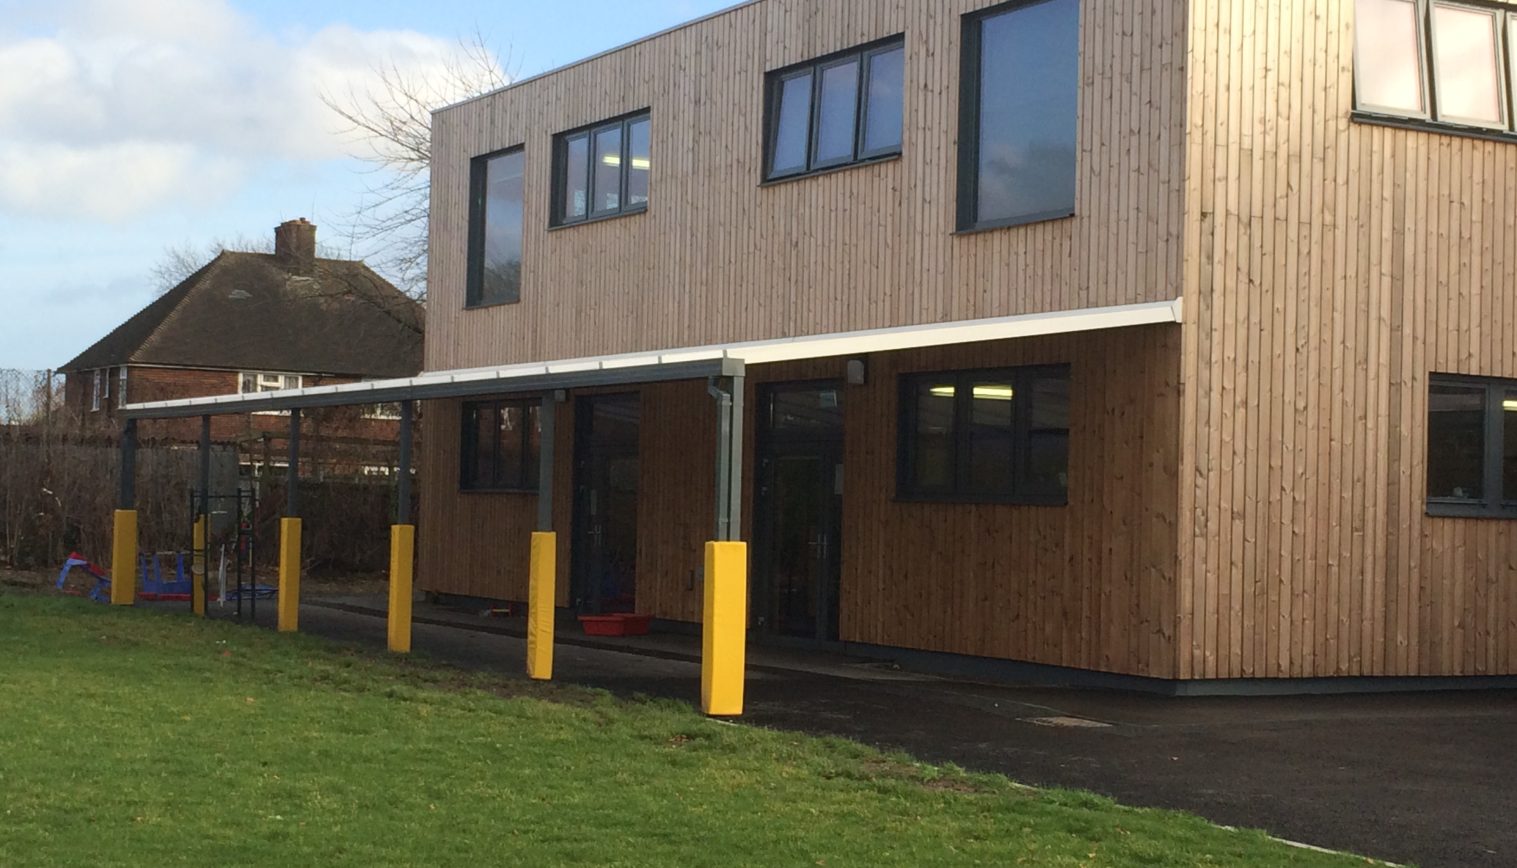 Roding Primary School – 2nd Wall Mounted Canopy